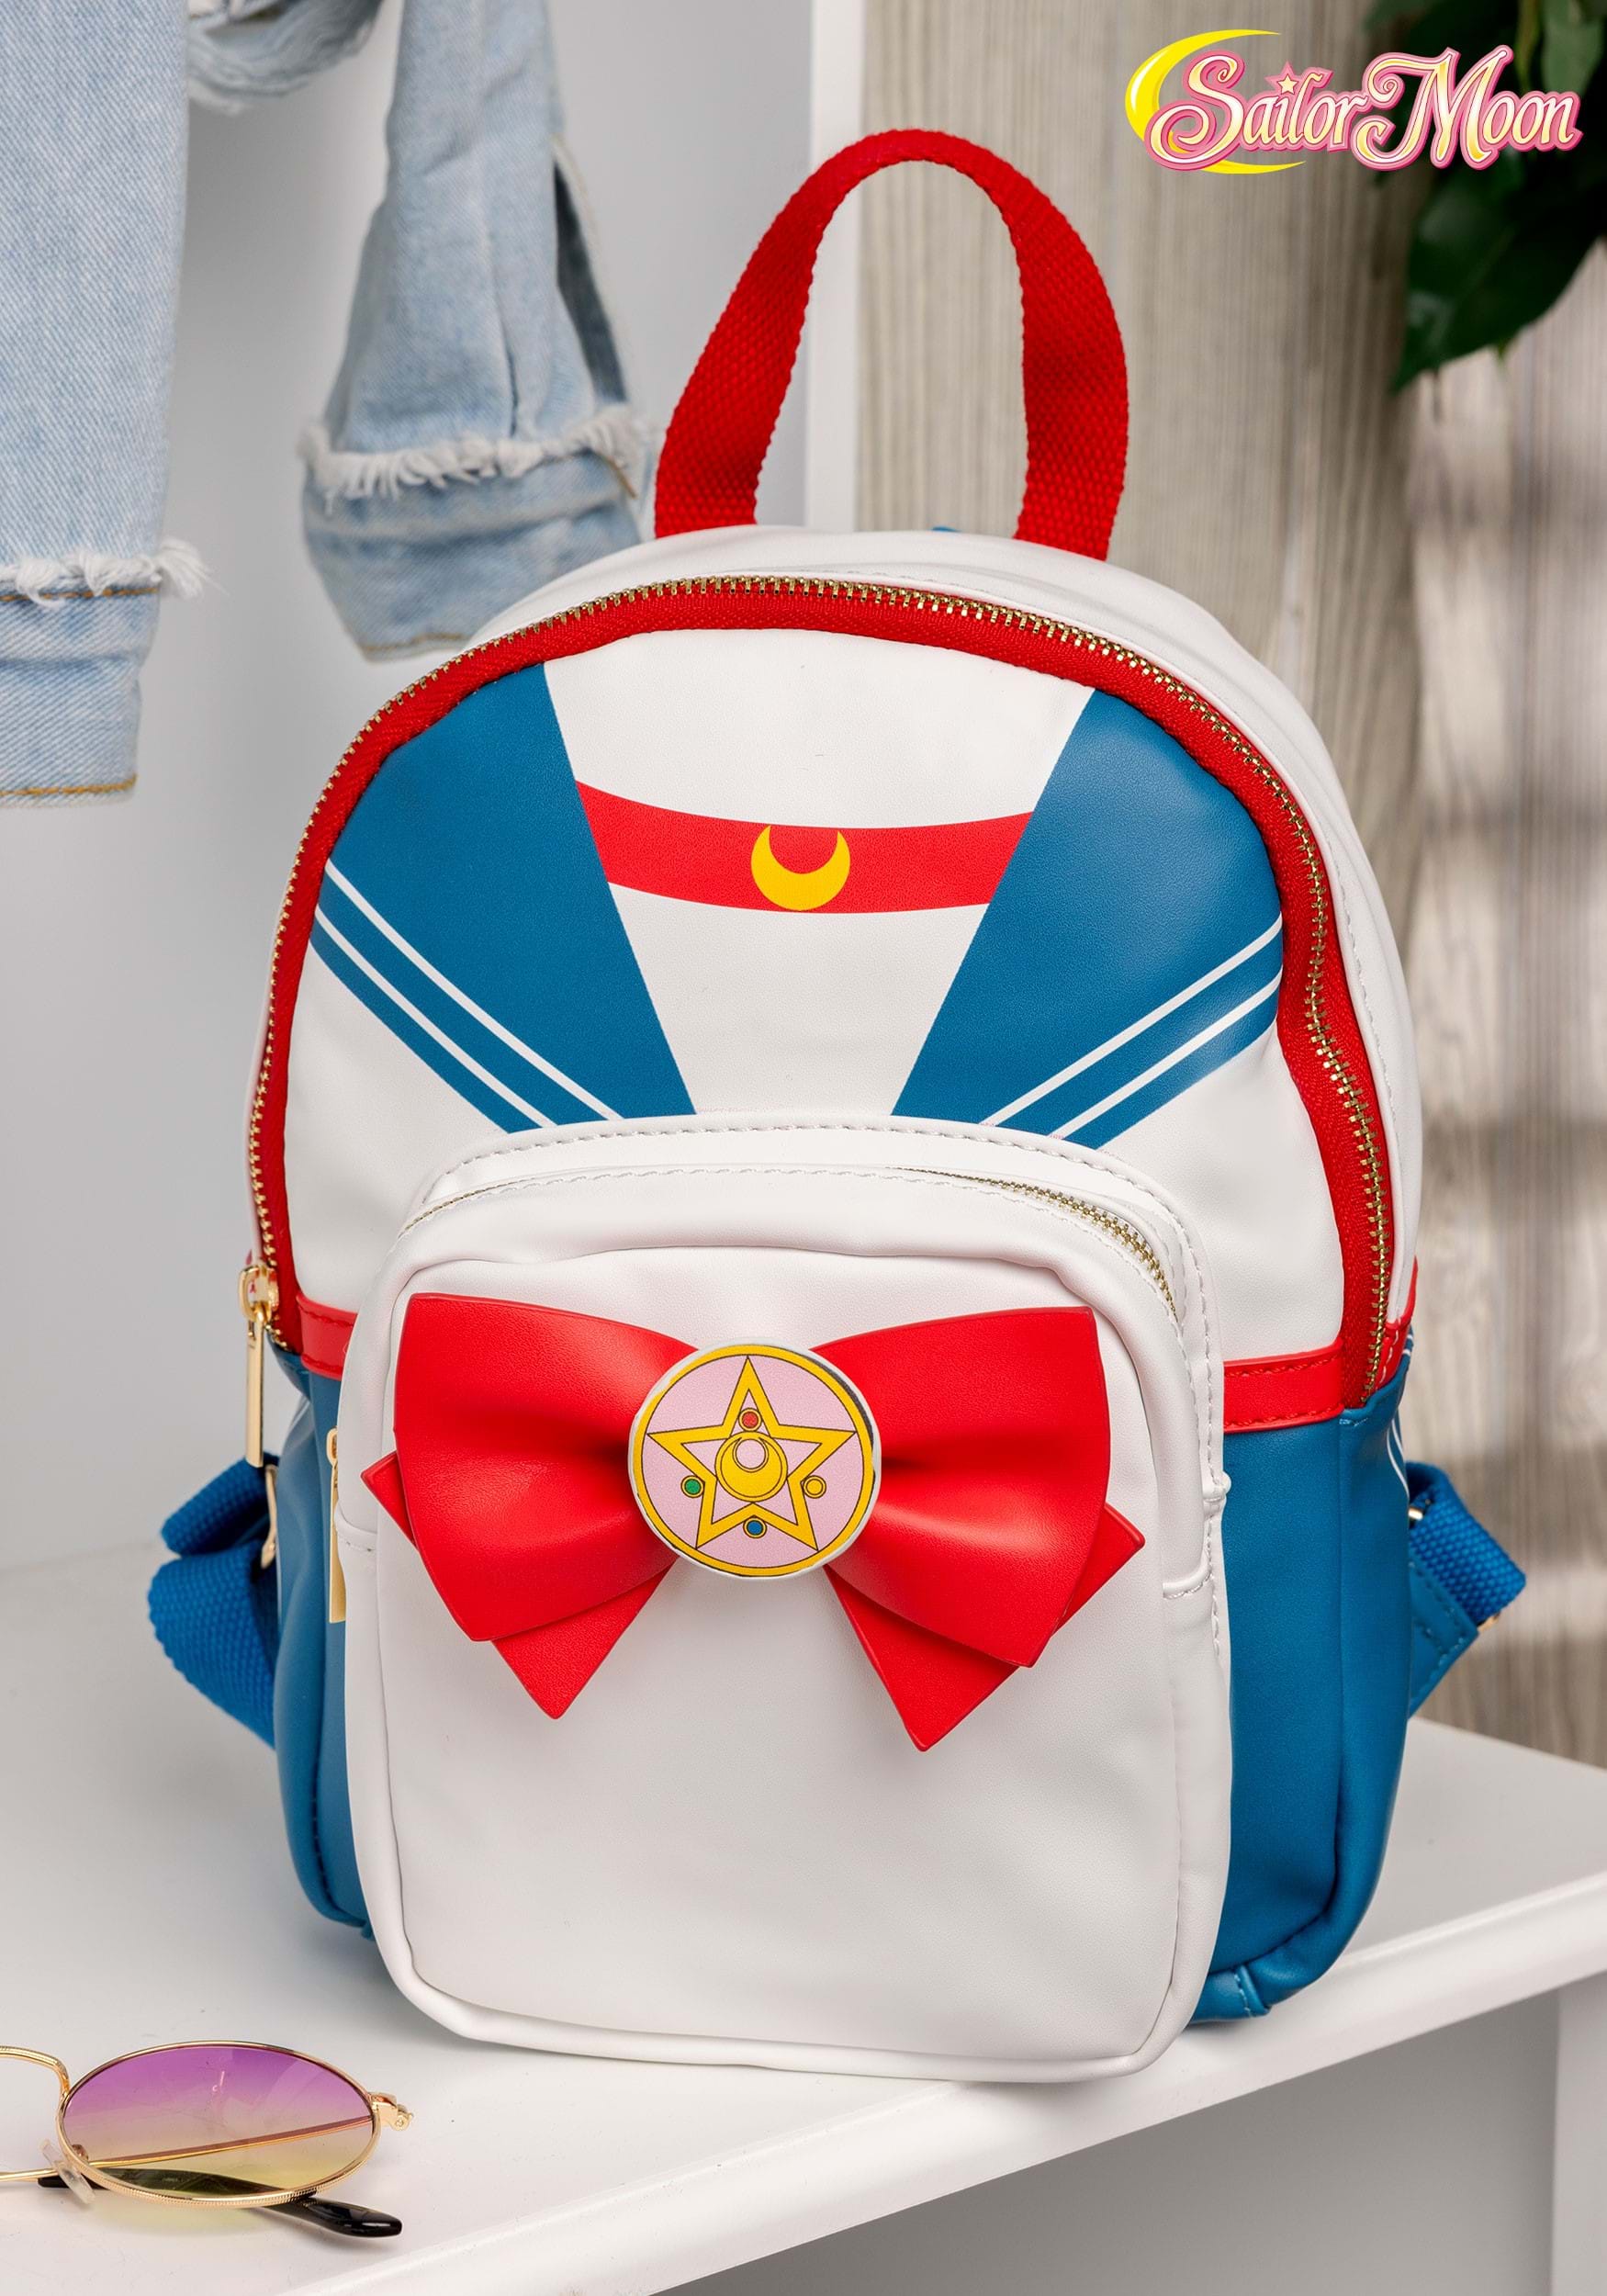 https://images.fun.com/products/88876/1-1/sailor-moon-outfit-backpack.jpg